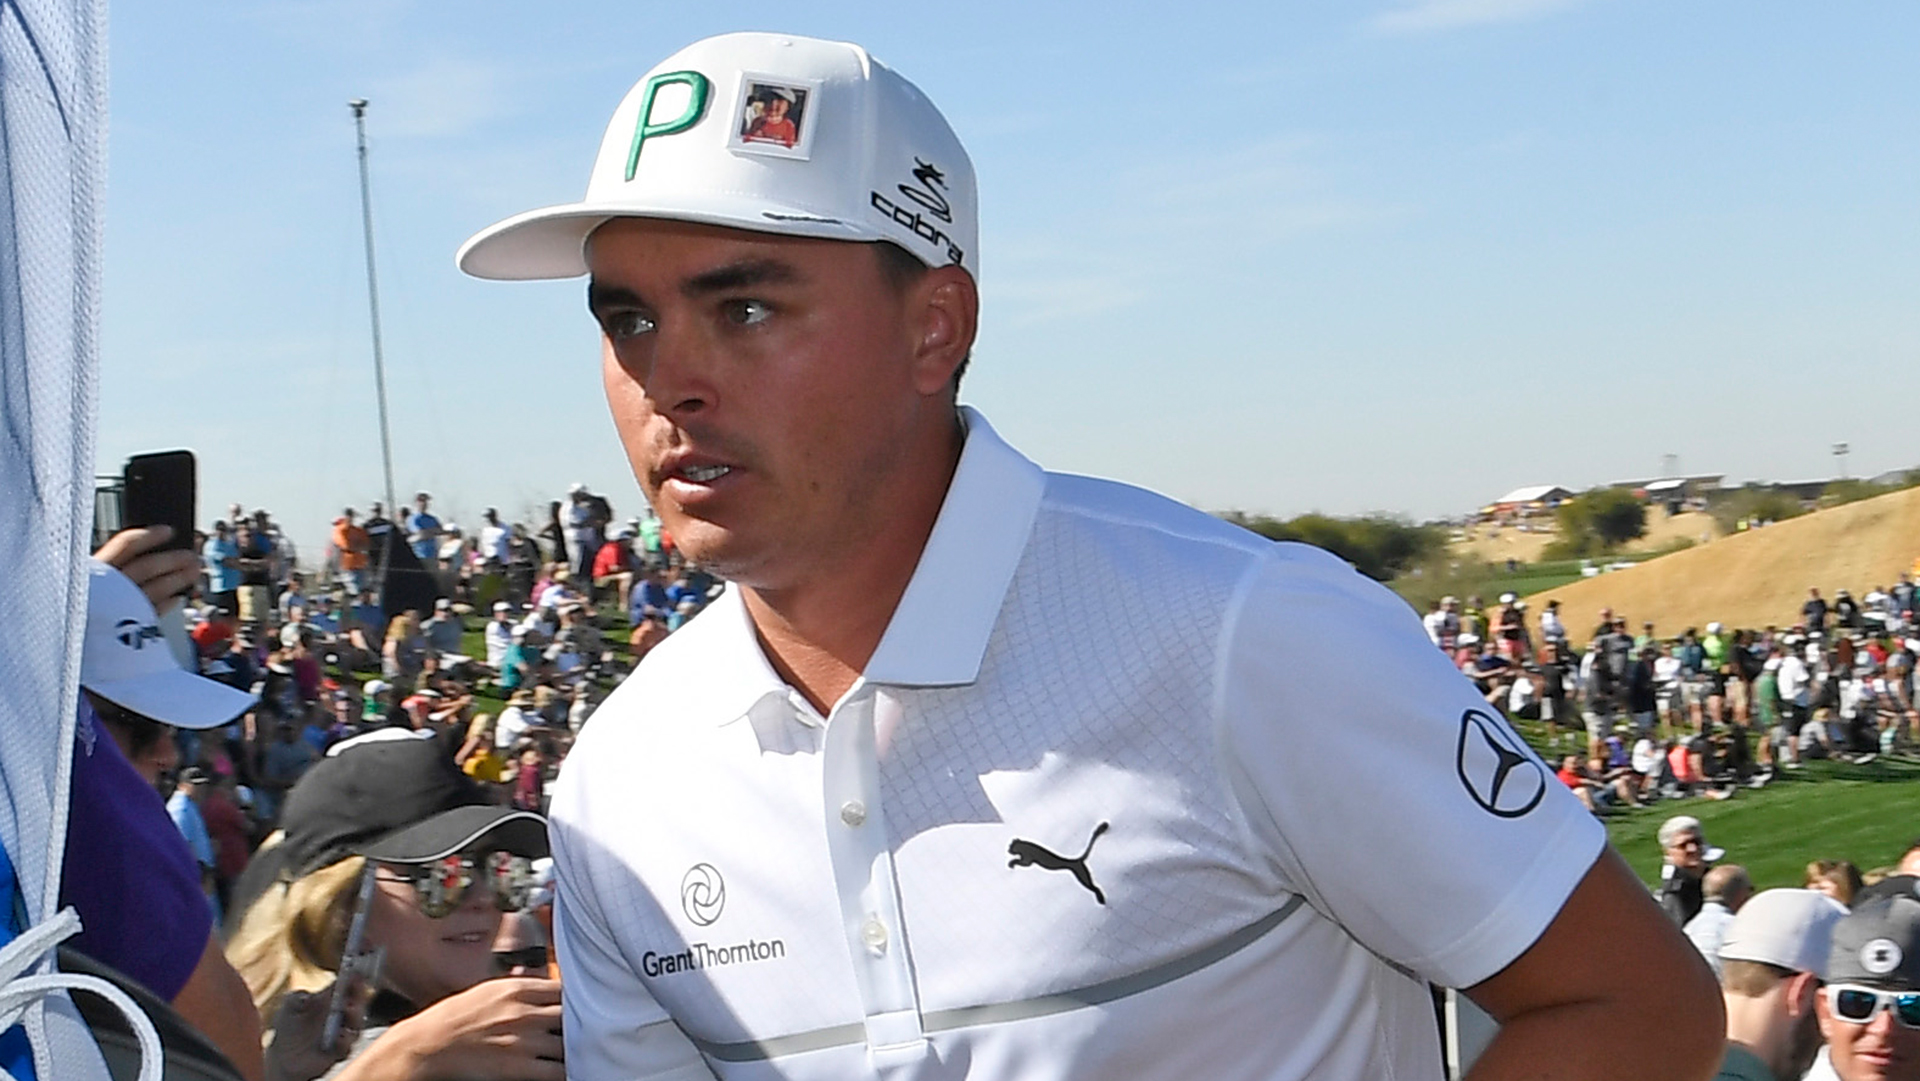 p on rickie fowler hat